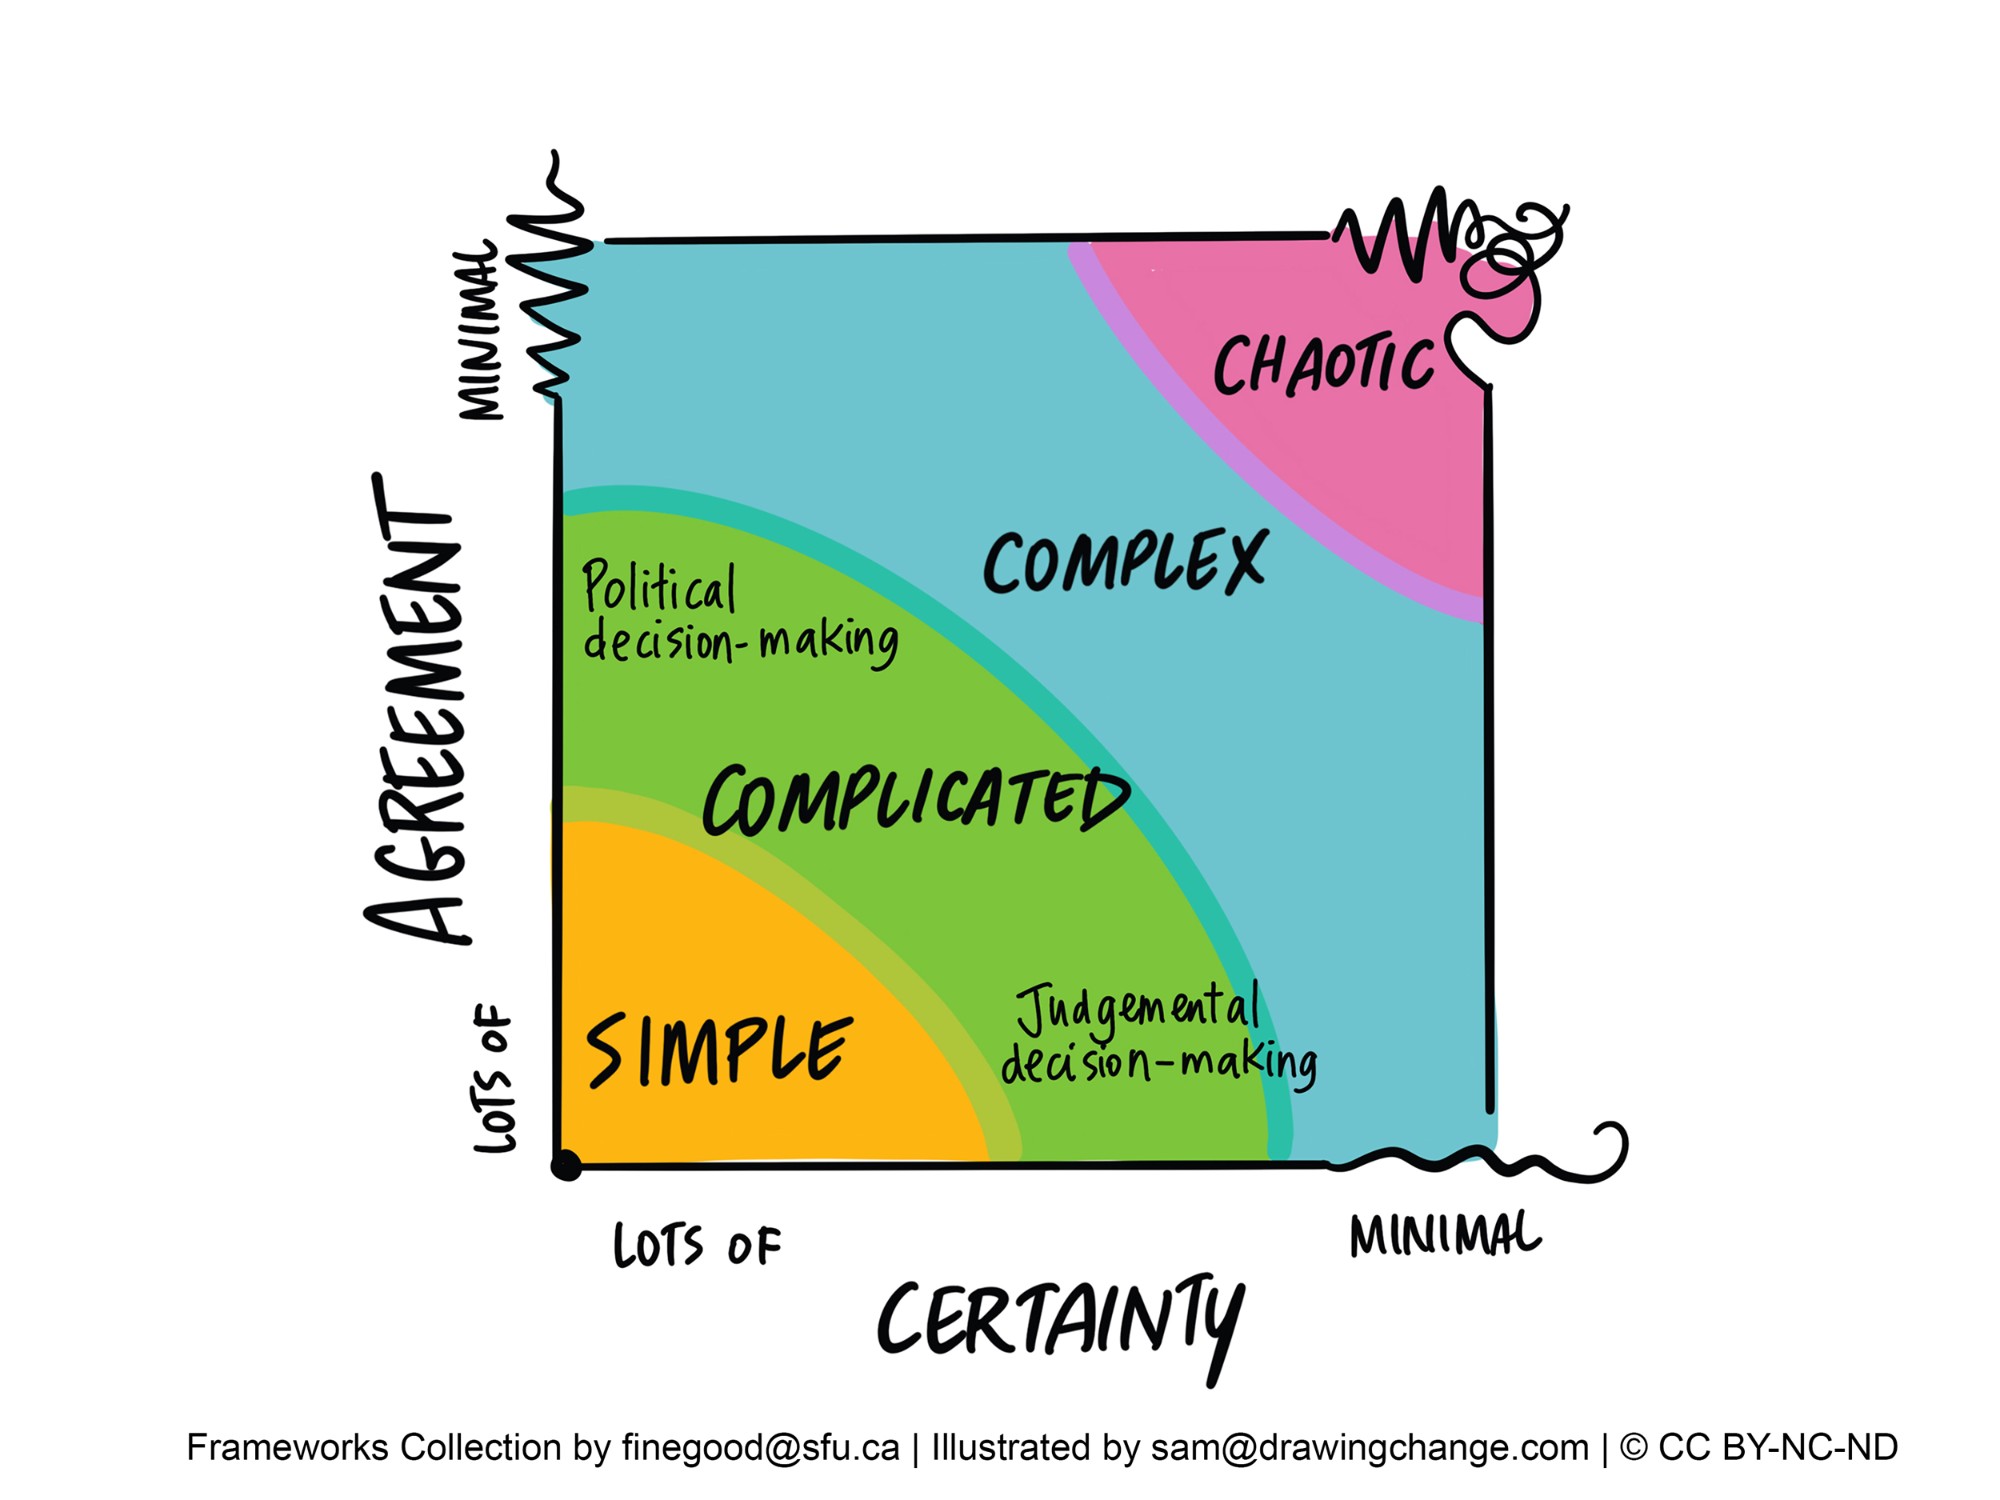 The image is a colorful graph that represents the Stacey Matrix, a model used for understanding the complexity of management decisions. It plots the degree of certainty against the level of agreement to categorize decision-making environments.  The x-axis at the bottom of the graph is labeled "CERTAINTY," ranging from "lots of" on the left to "minimal" on the right. The y-axis along the left side is labeled "AGREEMENT," ranging from "lots of" at the bottom to "minimal" at the top.   Four areas are demarcated within the graph:  - "SIMPLE" is in the bottom left corner, indicating high agreement and high certainty. This is typically where judgmental decision-making occurs. - "COMPLICATED" is in the middle, representing moderate levels of both certainty and agreement. - "COMPLEX" is towards the top right, indicating a moderate to minimal level of agreement and certainty. This is often the realm of political decision-making. - "CHAOTIC" is in the top right corner, showing minimal levels of both certainty and agreement.  Wavy lines are drawn near the "minimal" markers on both the x and y axes, suggesting the fluid and uncertain nature of these areas. The graph is a tool used to help leaders and managers decide what kinds of management or decision-making approaches are most appropriate for the situation at hand. The image is annotated with the source: Frameworks Collection by finegood@sfu.ca, illustrated by sam@drawingchange.com, and is marked with a Creative Commons CC BY-NC-ND license.